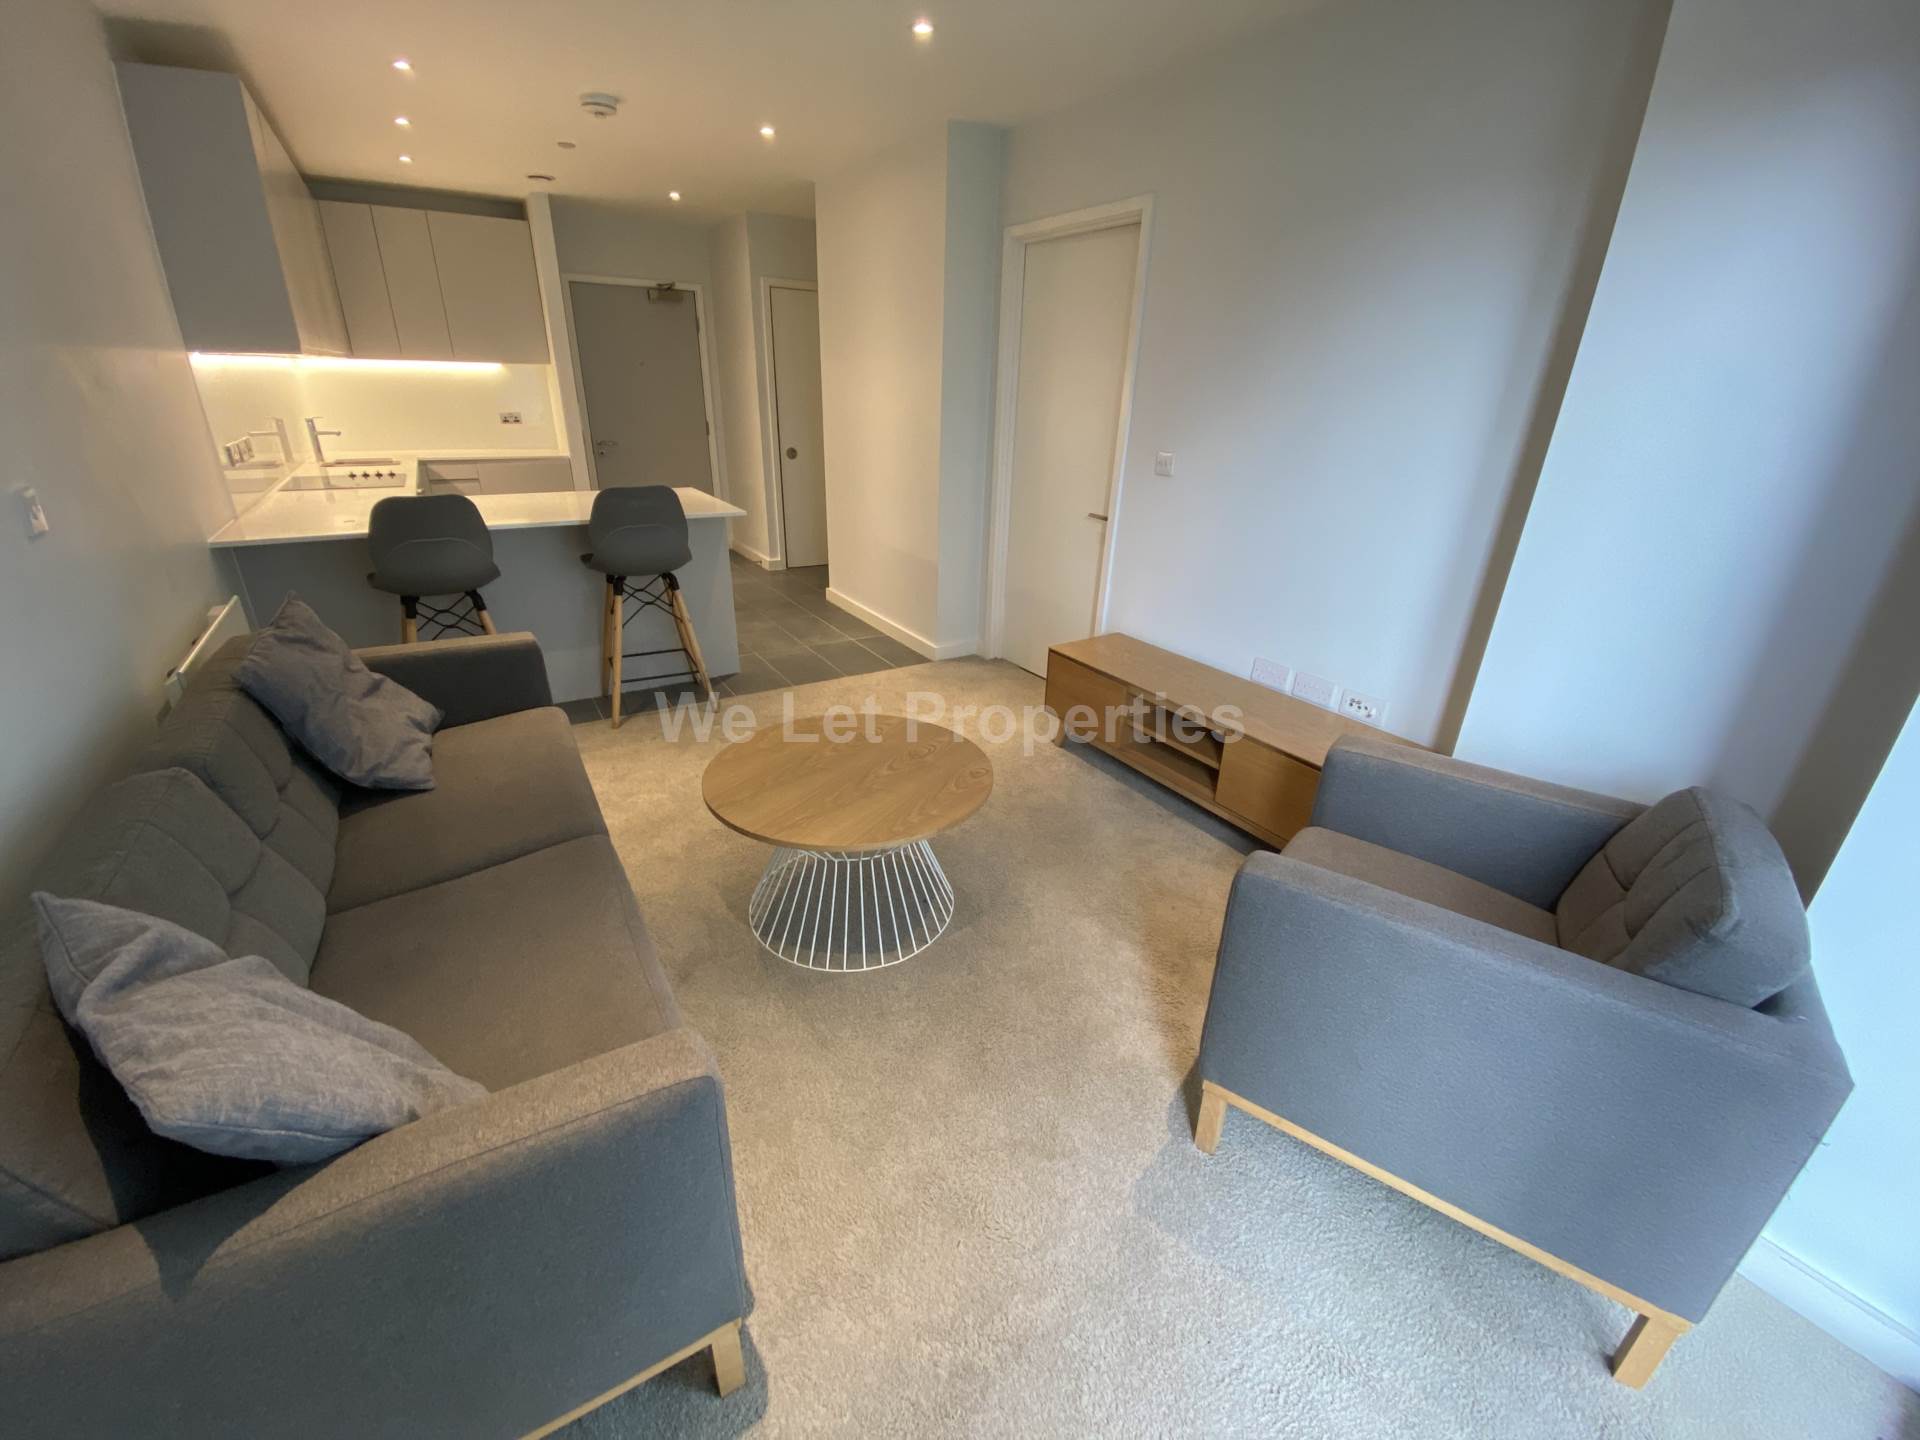 1 bed Apartment for rent in Salford. From We Let Properties - Manchester